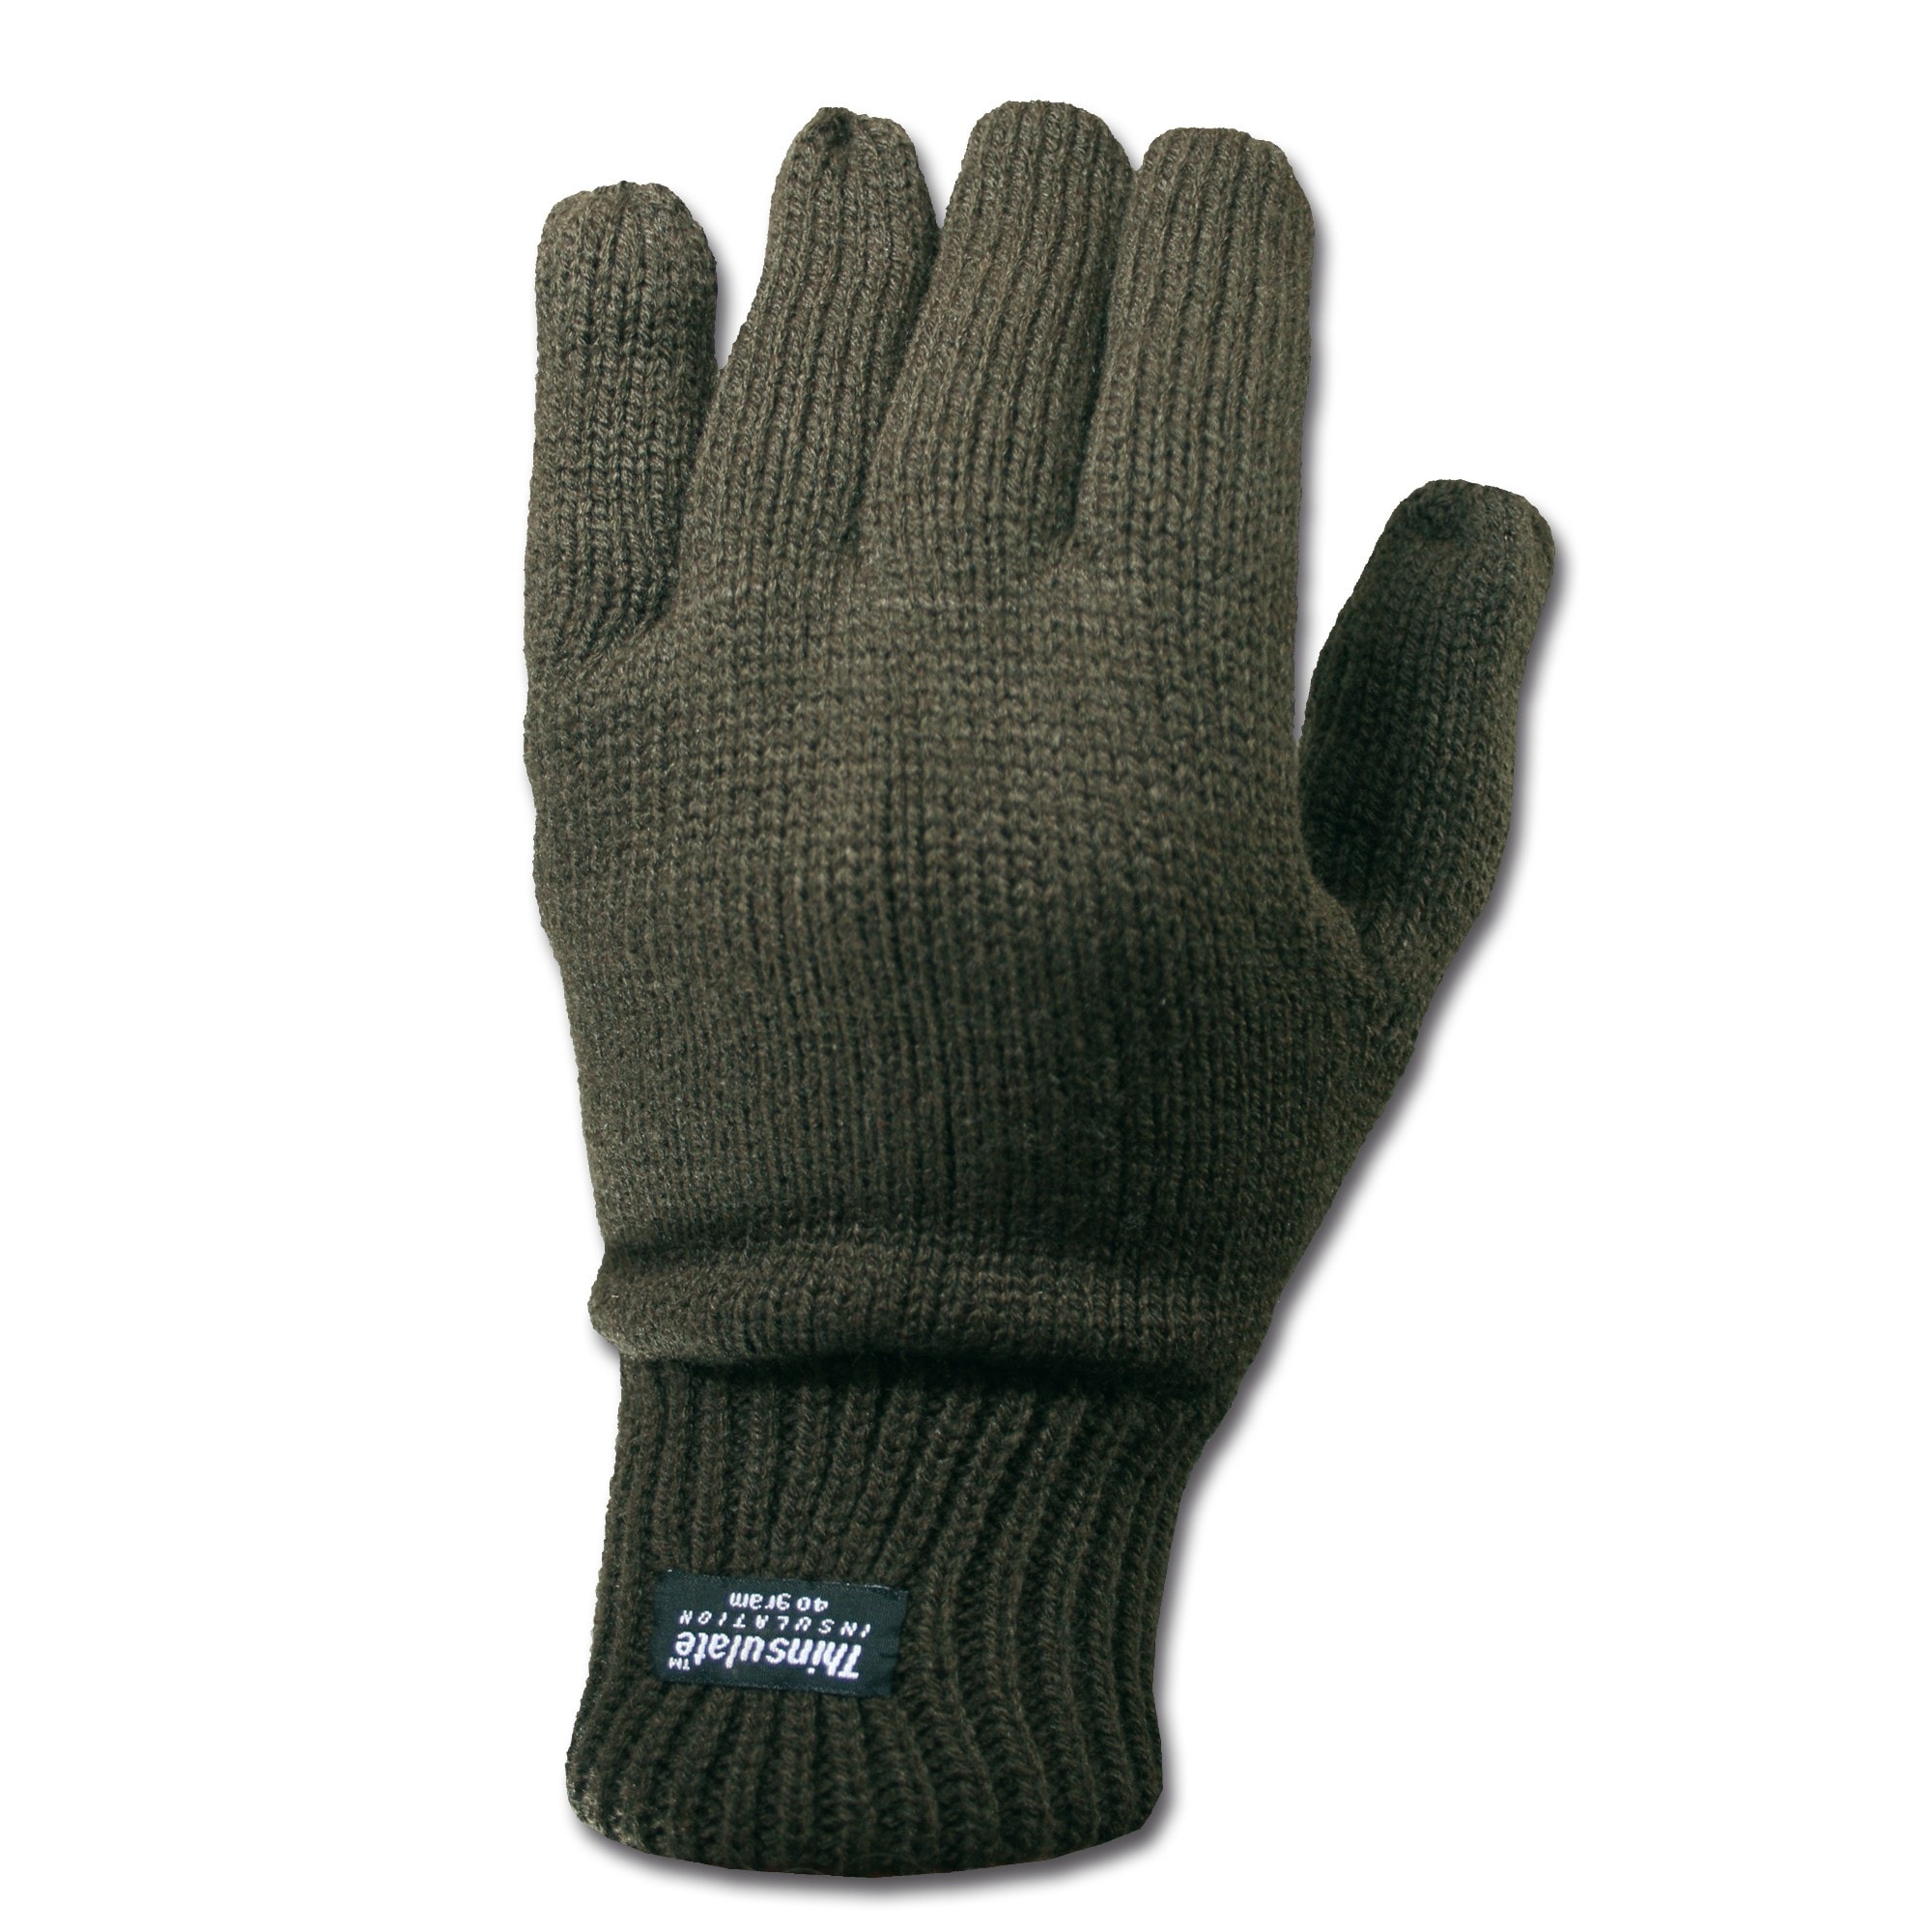 Knitted Thinsulate Gloves olive | Knitted Thinsulate Gloves olive ...